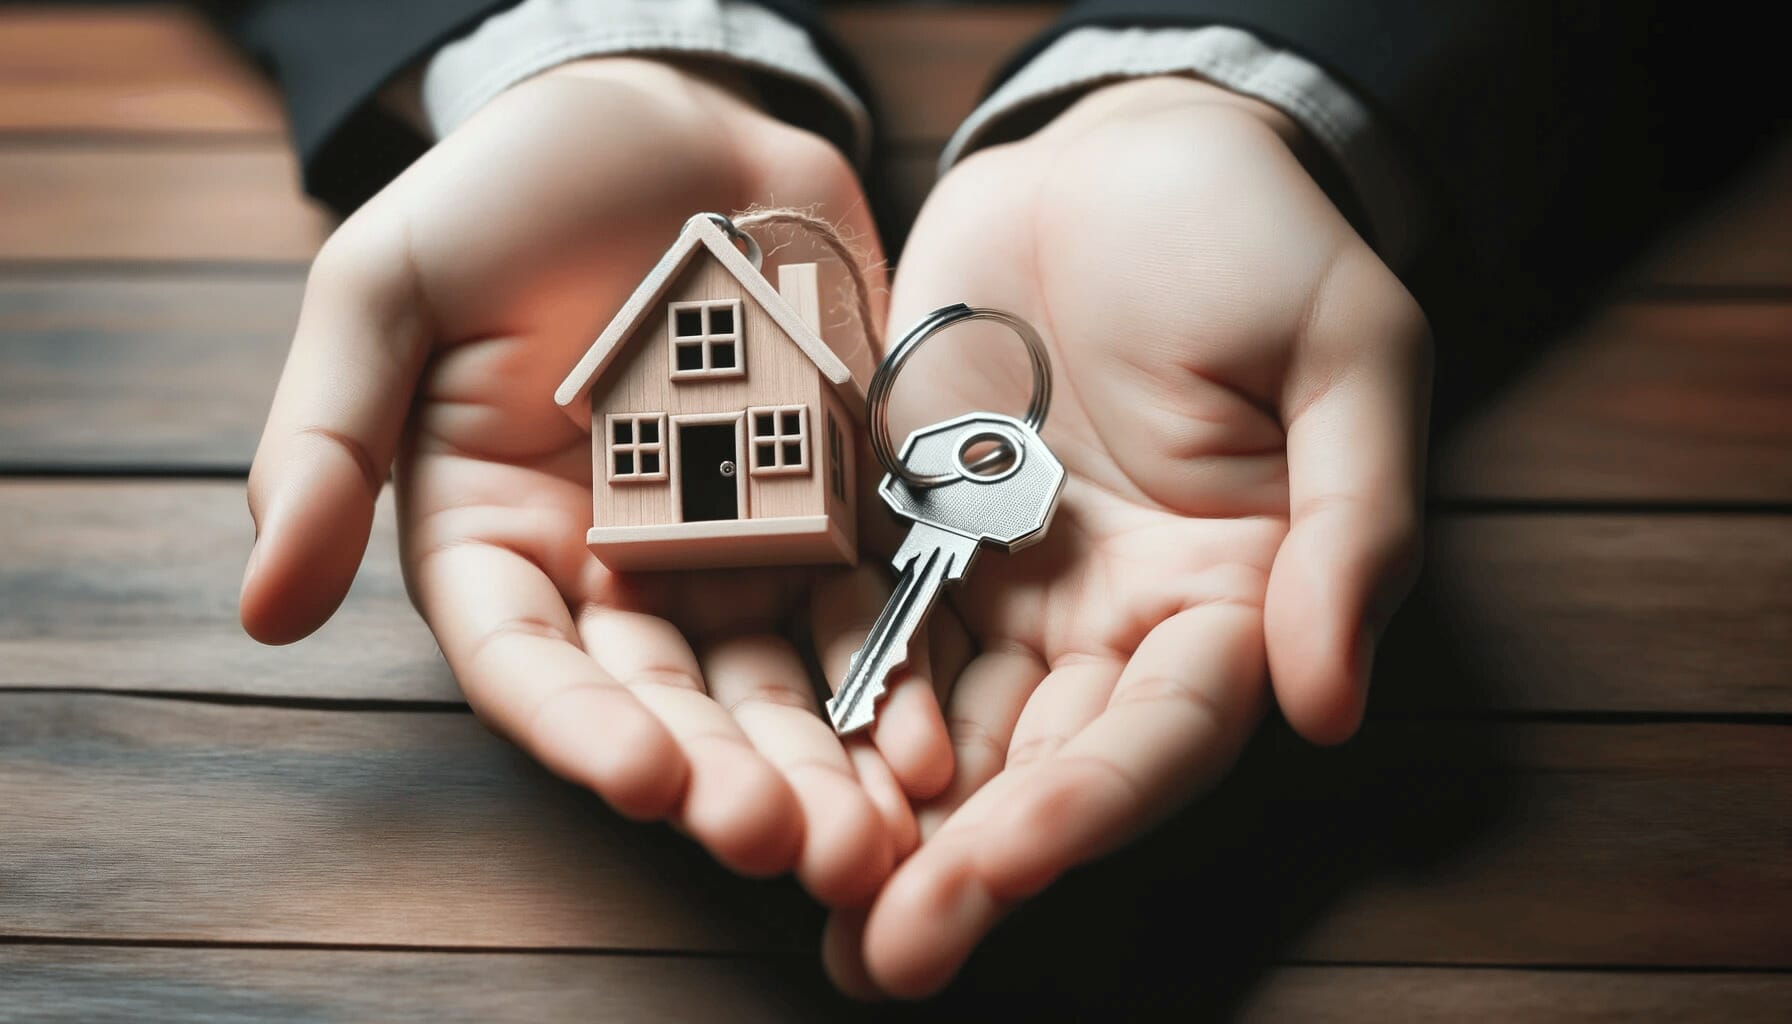 DALL·E 2023 10 16 17.15.43 Photo of a hand holding a house key with a keychain in the shape of a house representing the achievement of obtaining a housing loan